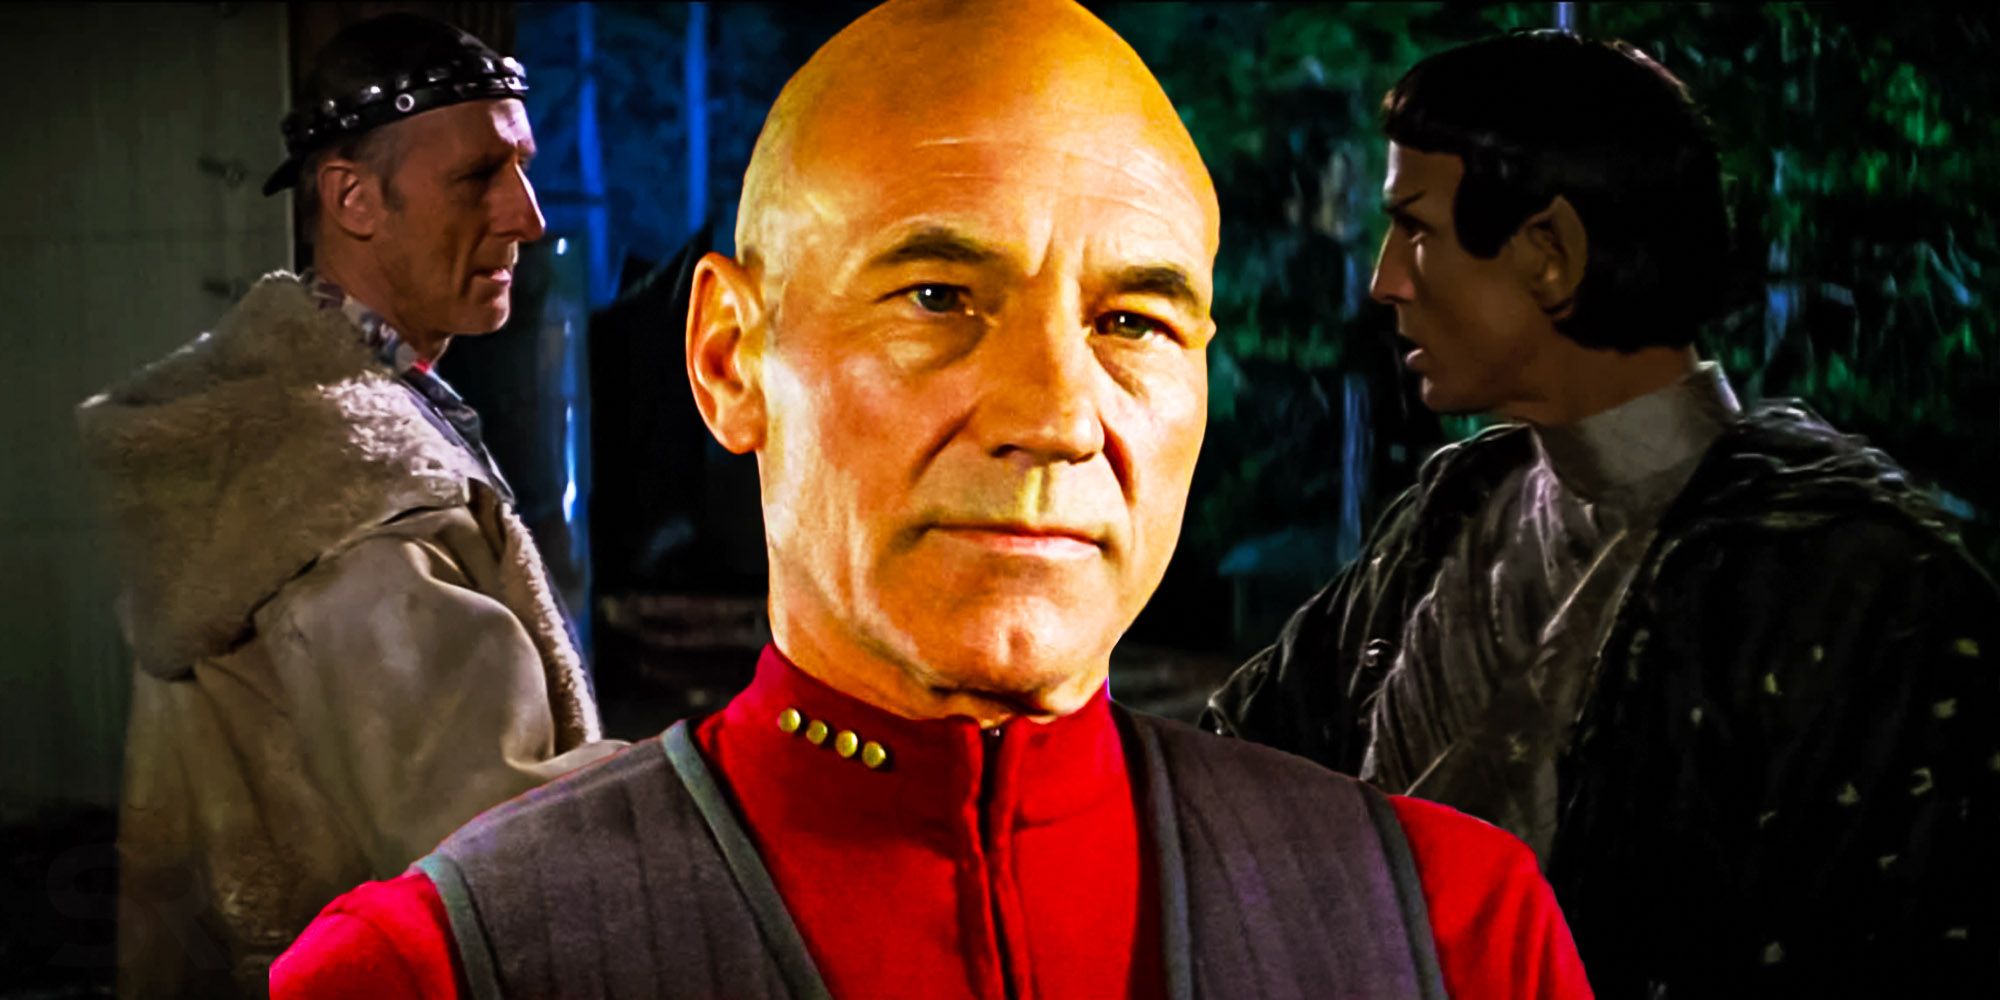 Patrick Stewart as Captain Picard in front of Zephram Cochrane meeting a Vulcan in Star Trek: First Contact